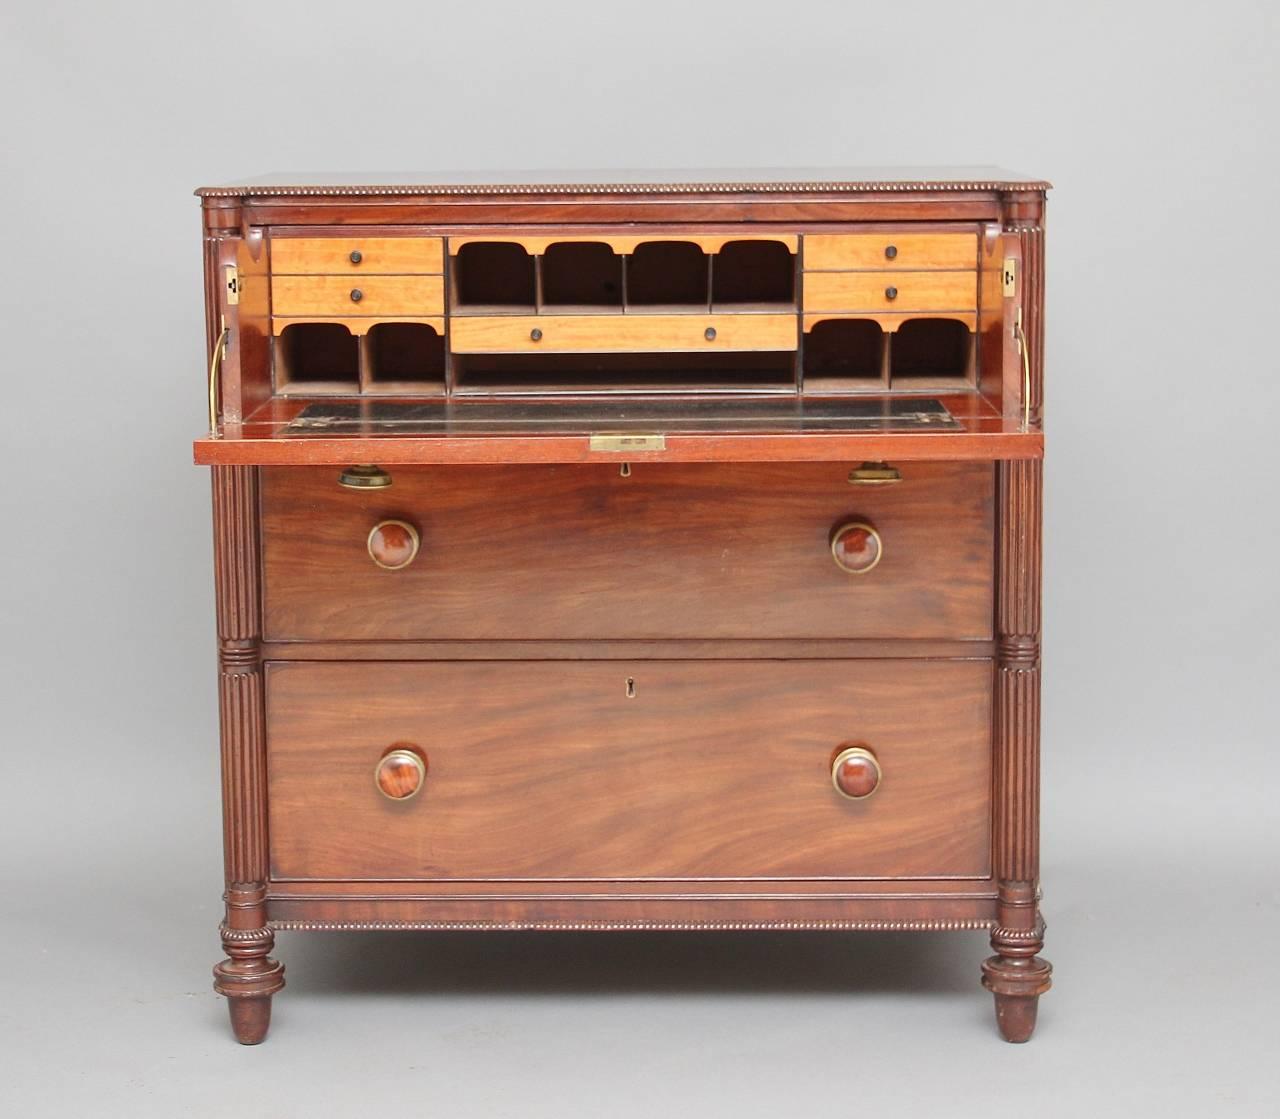 Regency Early 19th Century Secretaire Chest of Drawers